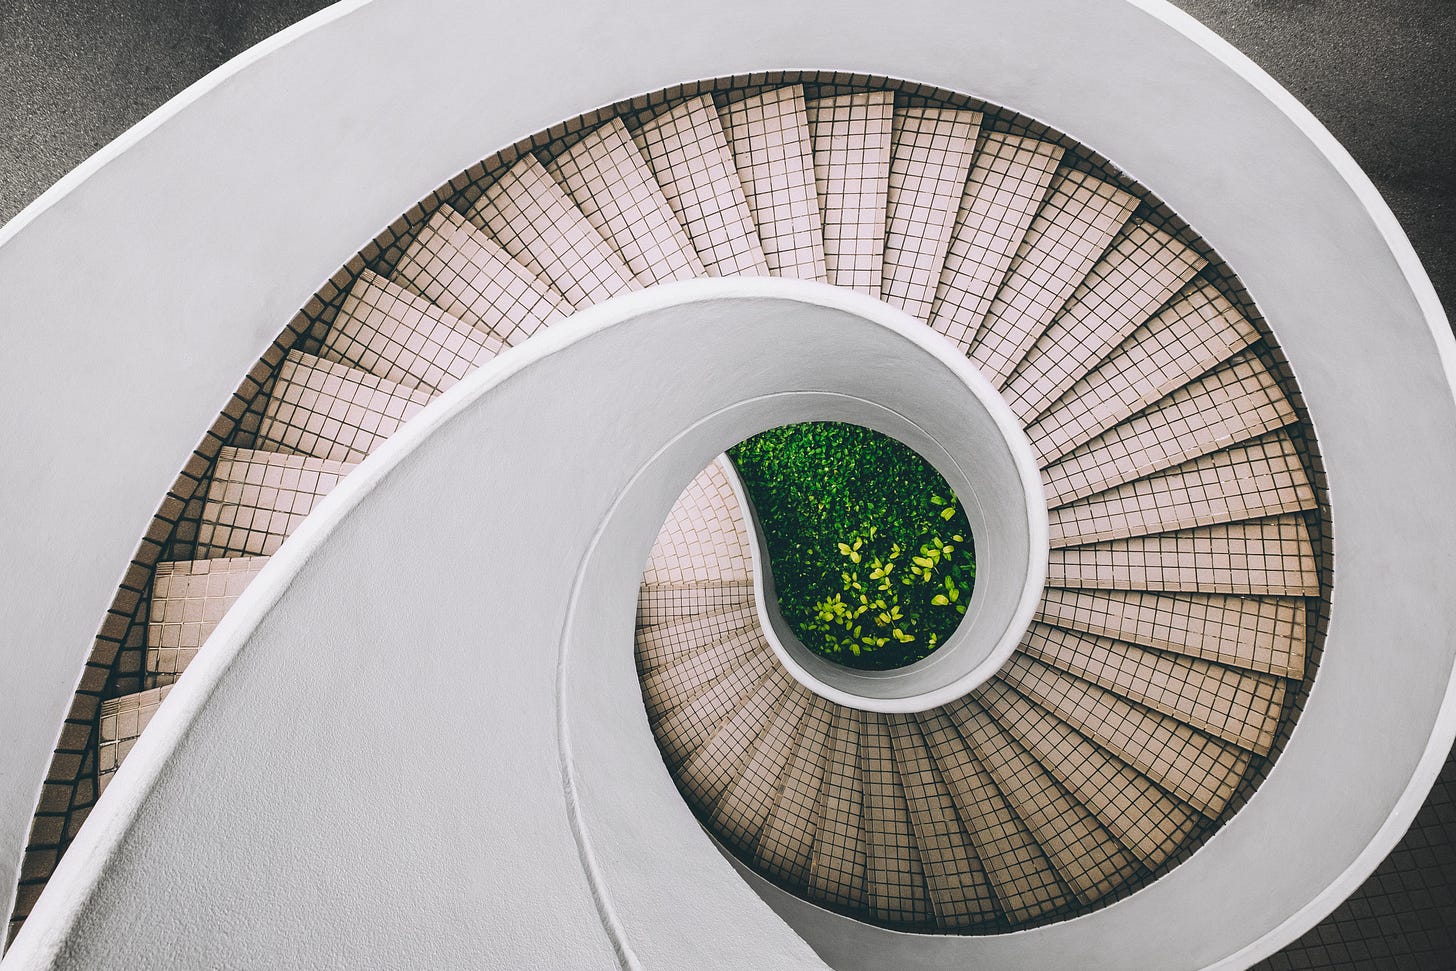 natural grassy scene surrounded by spiraling stair case